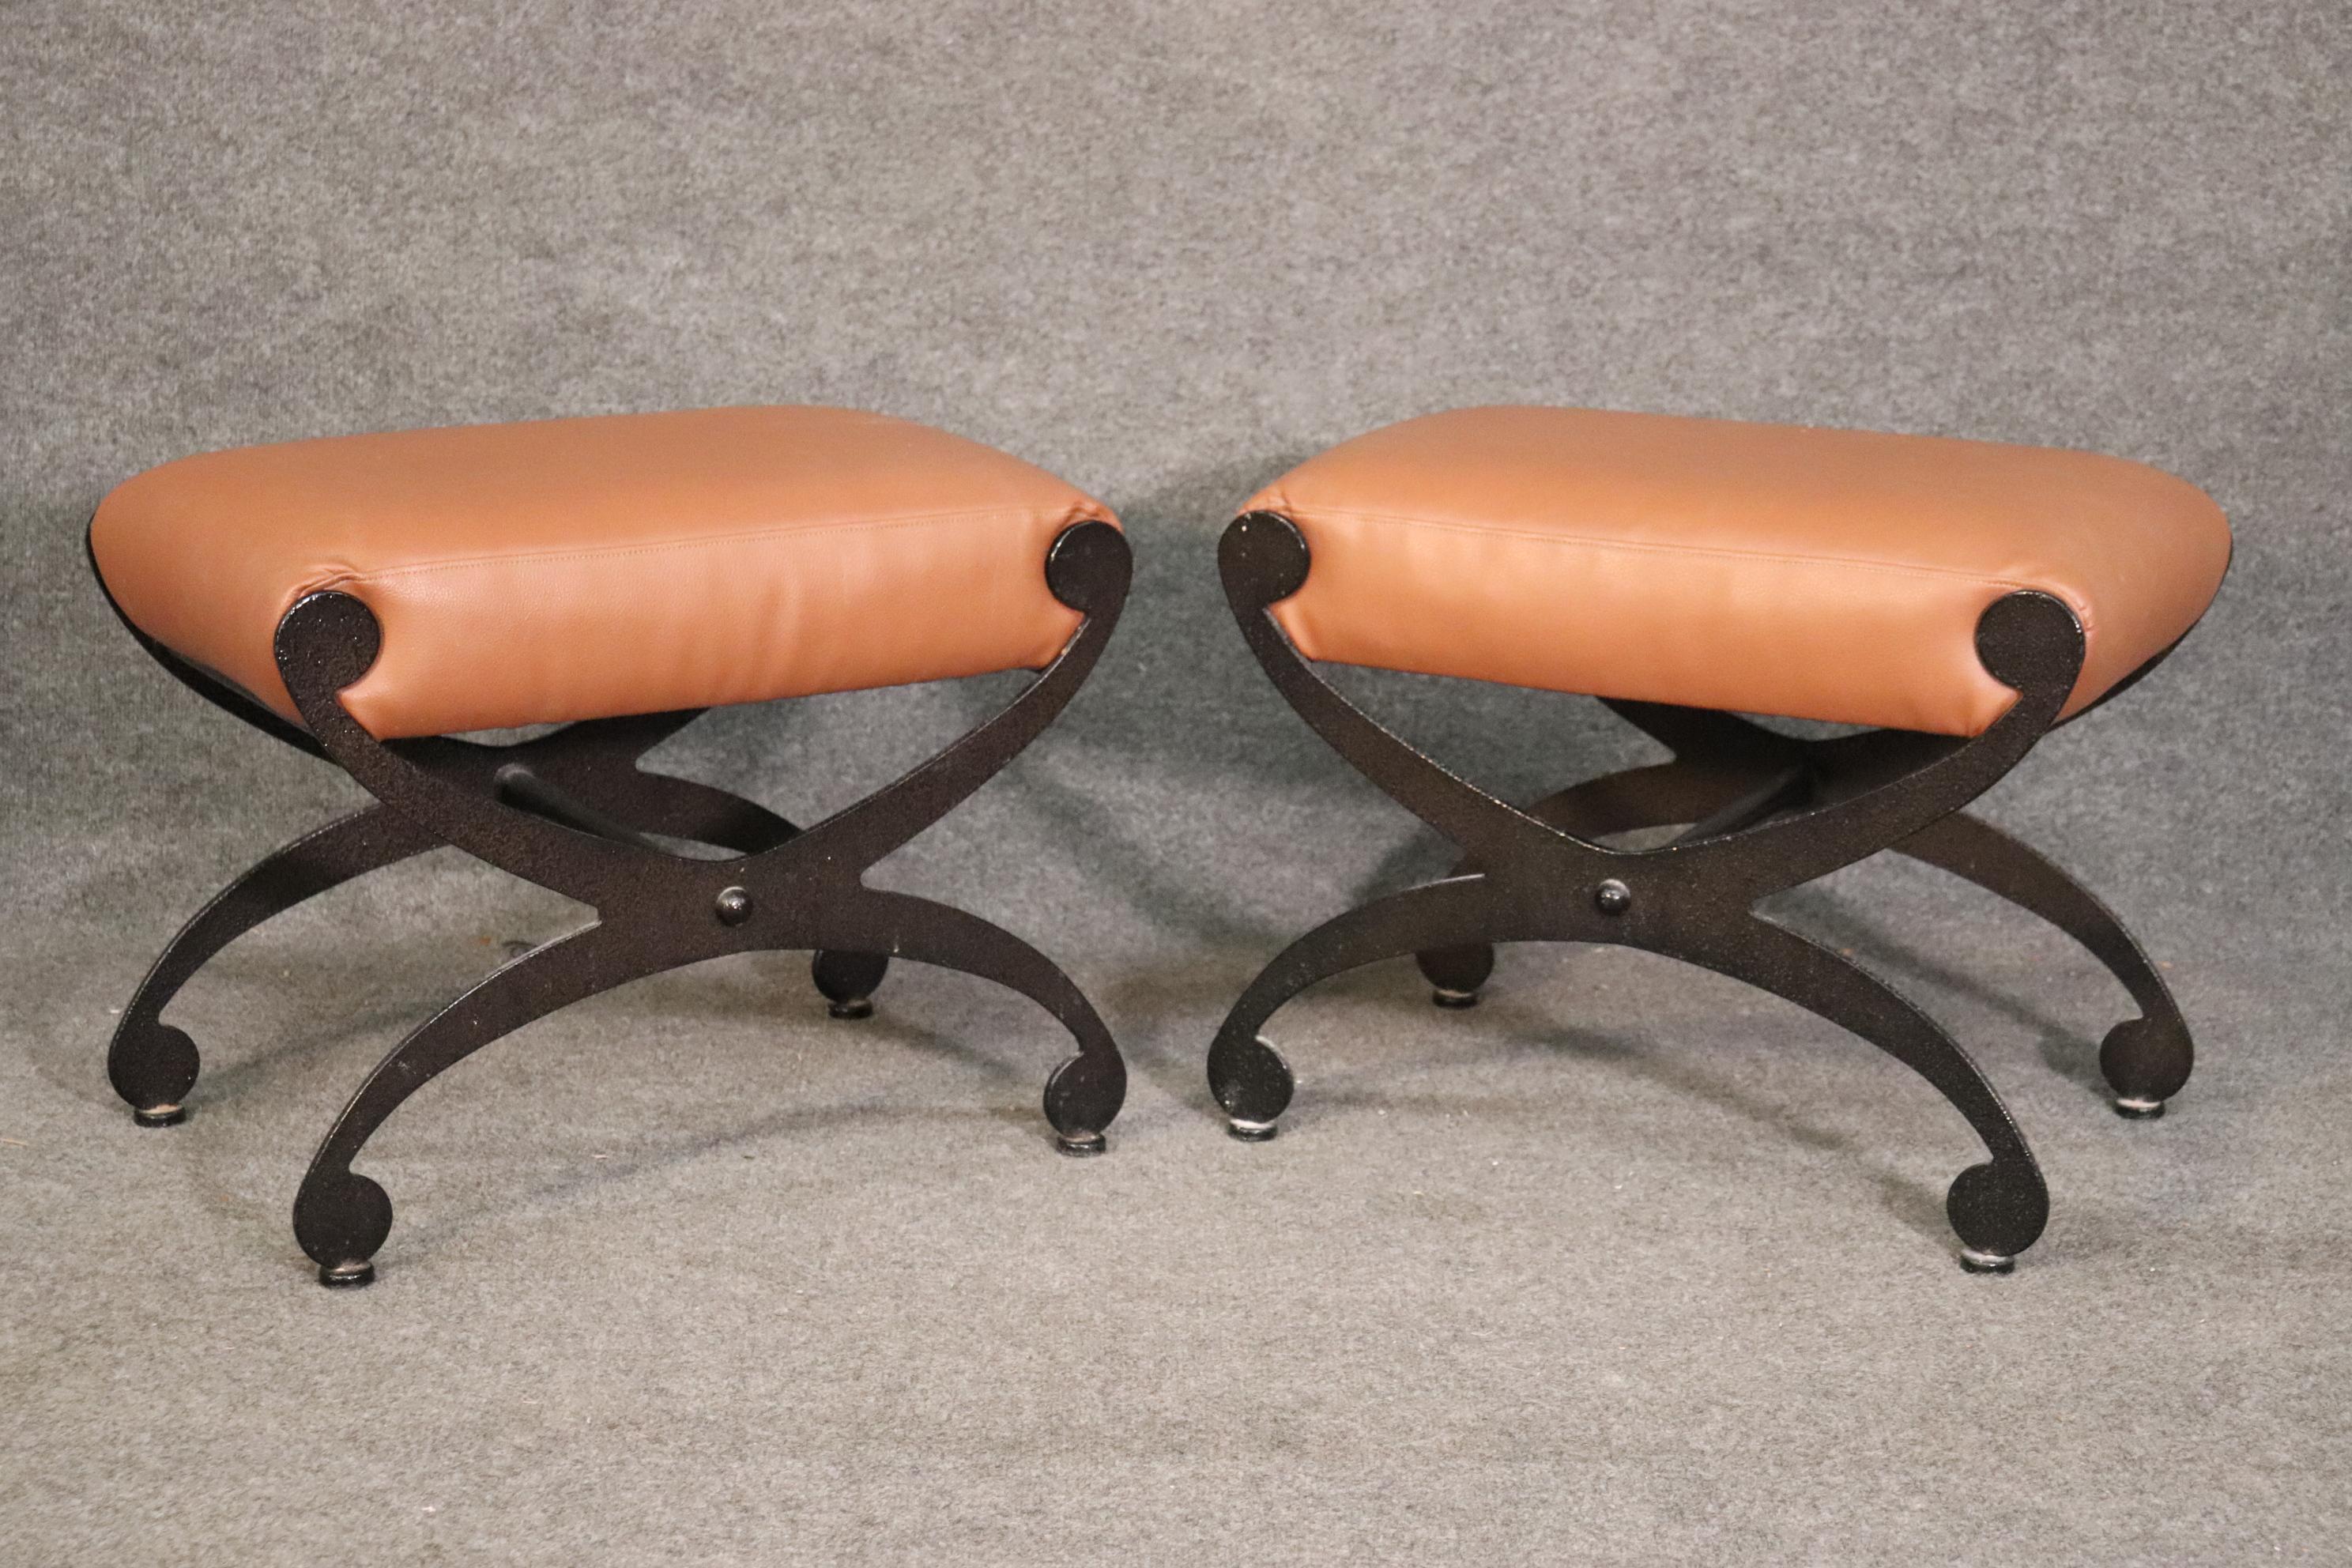 These beautiful leather upholstered wrought iron benches have that great cerule or maybe an x shape. They are in very good condition with minor signs of age and wear but really nothing to mention. The look is unique and chic, very clean lines and